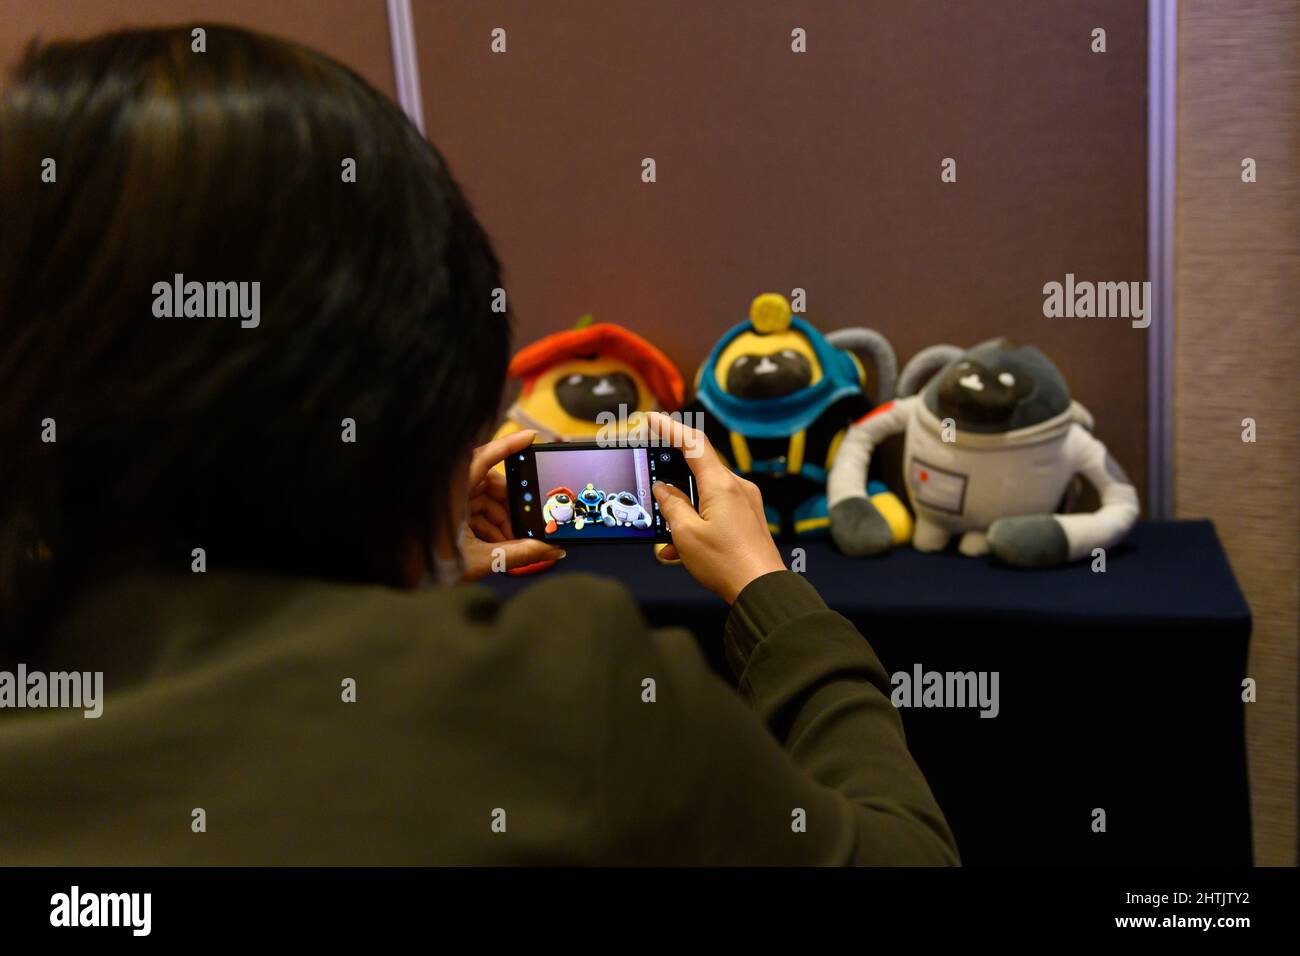 (220301) -- HAIKOU, March 1, 2022 (Xinhua) -- A visitor takes photos of the mascots for the 2022 China International Consumer Products Expo, styled after the Hainan gibbon, in Haikou, south China's Hainan Province, March 1, 2022. Hainan gibbons are the most endangered of all gibbons and the world's rarest primate. They are endemic to the southern Chinese island of Hainan. The mascots reflect the green consumption approach of the expo, according to Ruslan Tulenov, a global media officer at the Hainan Provincial Bureau of International Economic Development. The mascots embody the three dominan Stock Photo